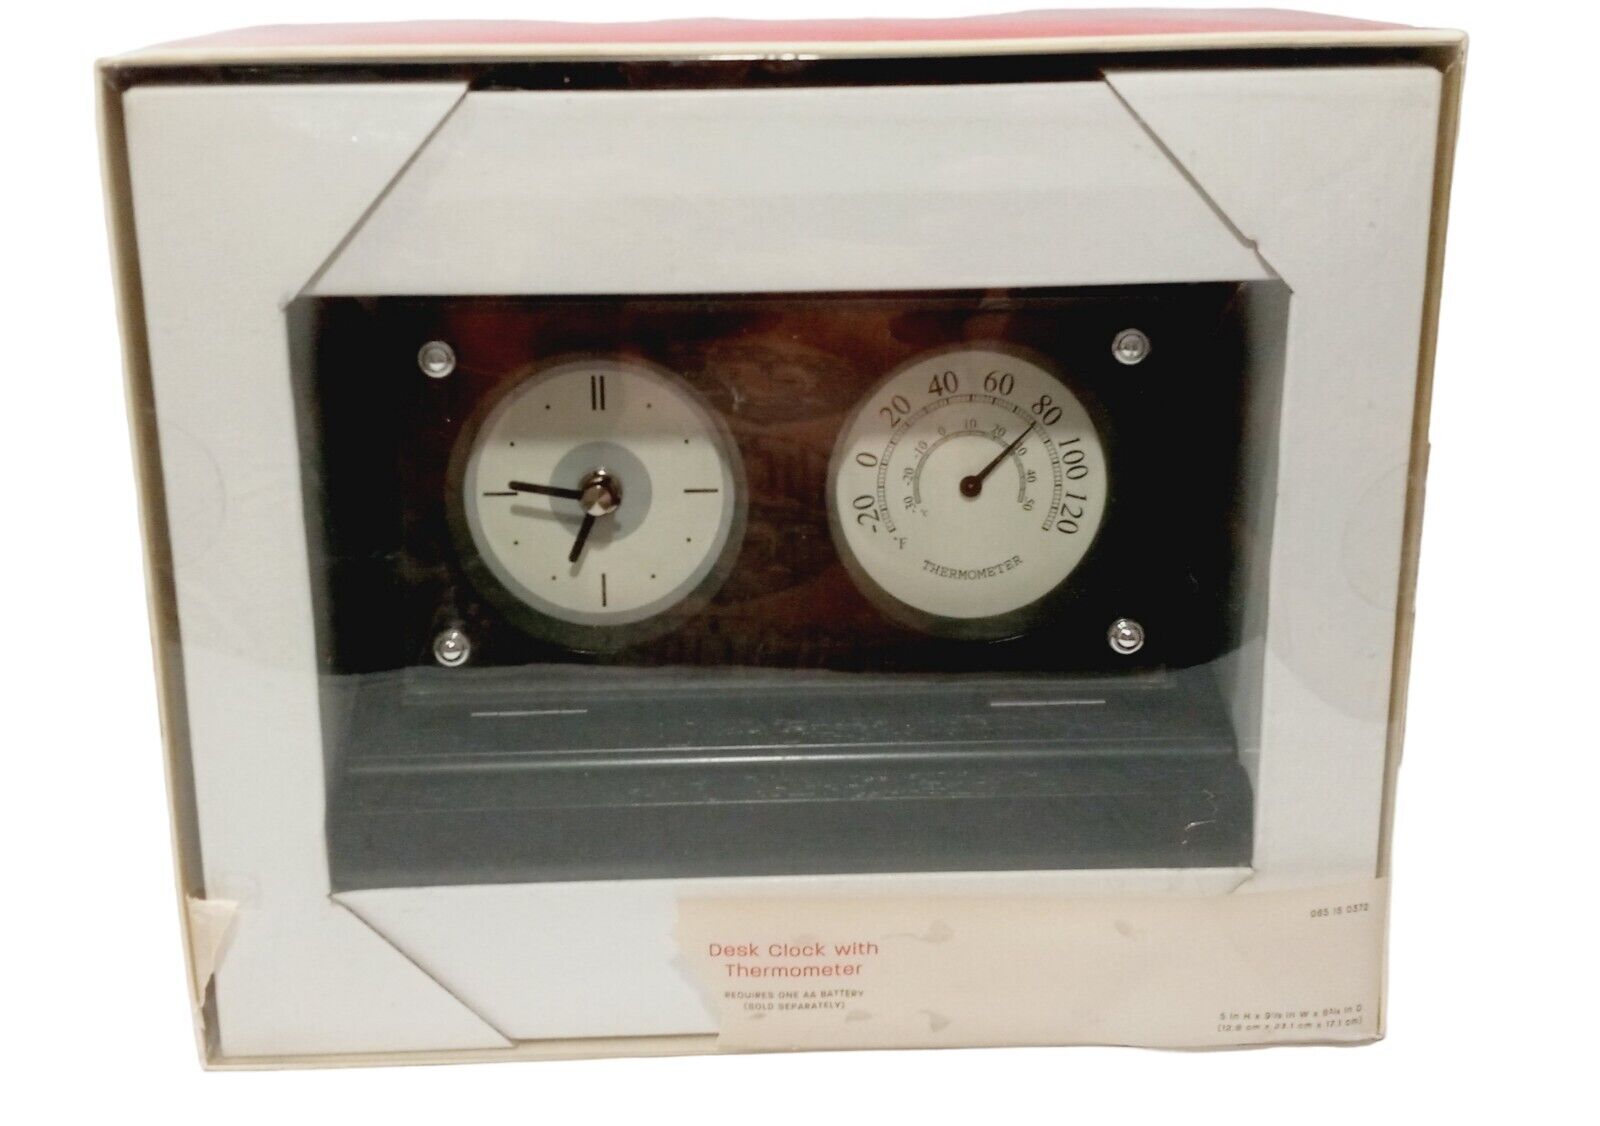 Desk Clock With Thermometer Target Brand NEW Open Box FAST SHIPPING